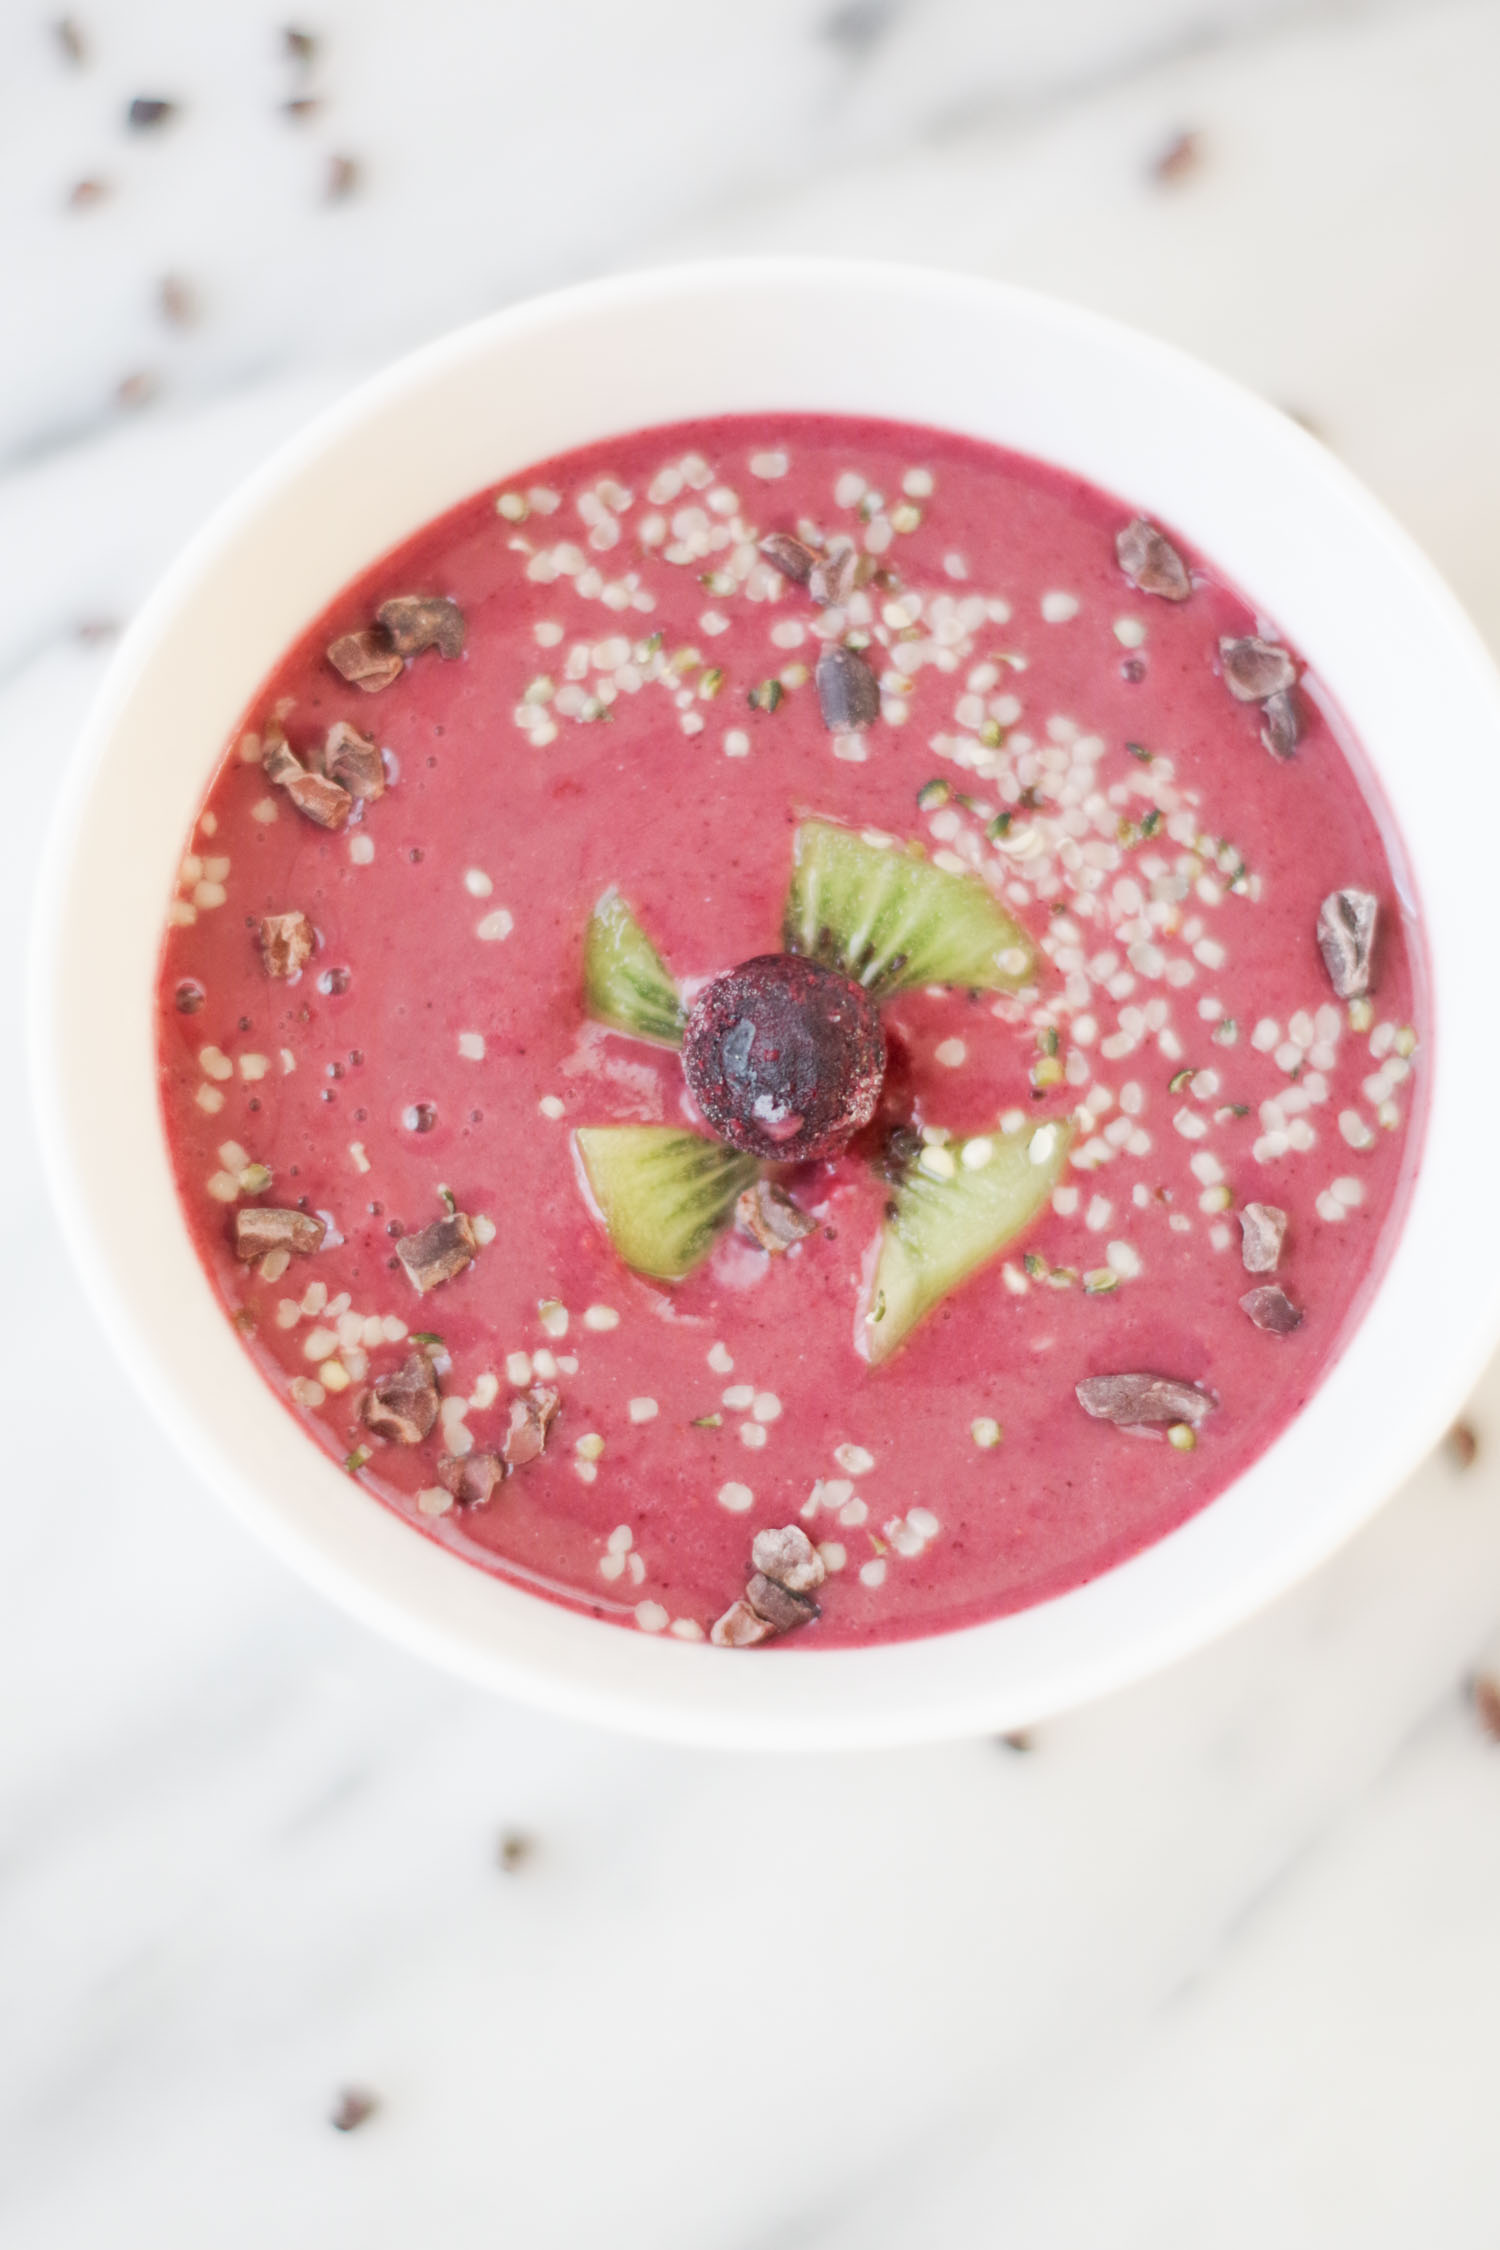 Smoothie bowls are beautiful, even when simple ||by beautiful Ingredient